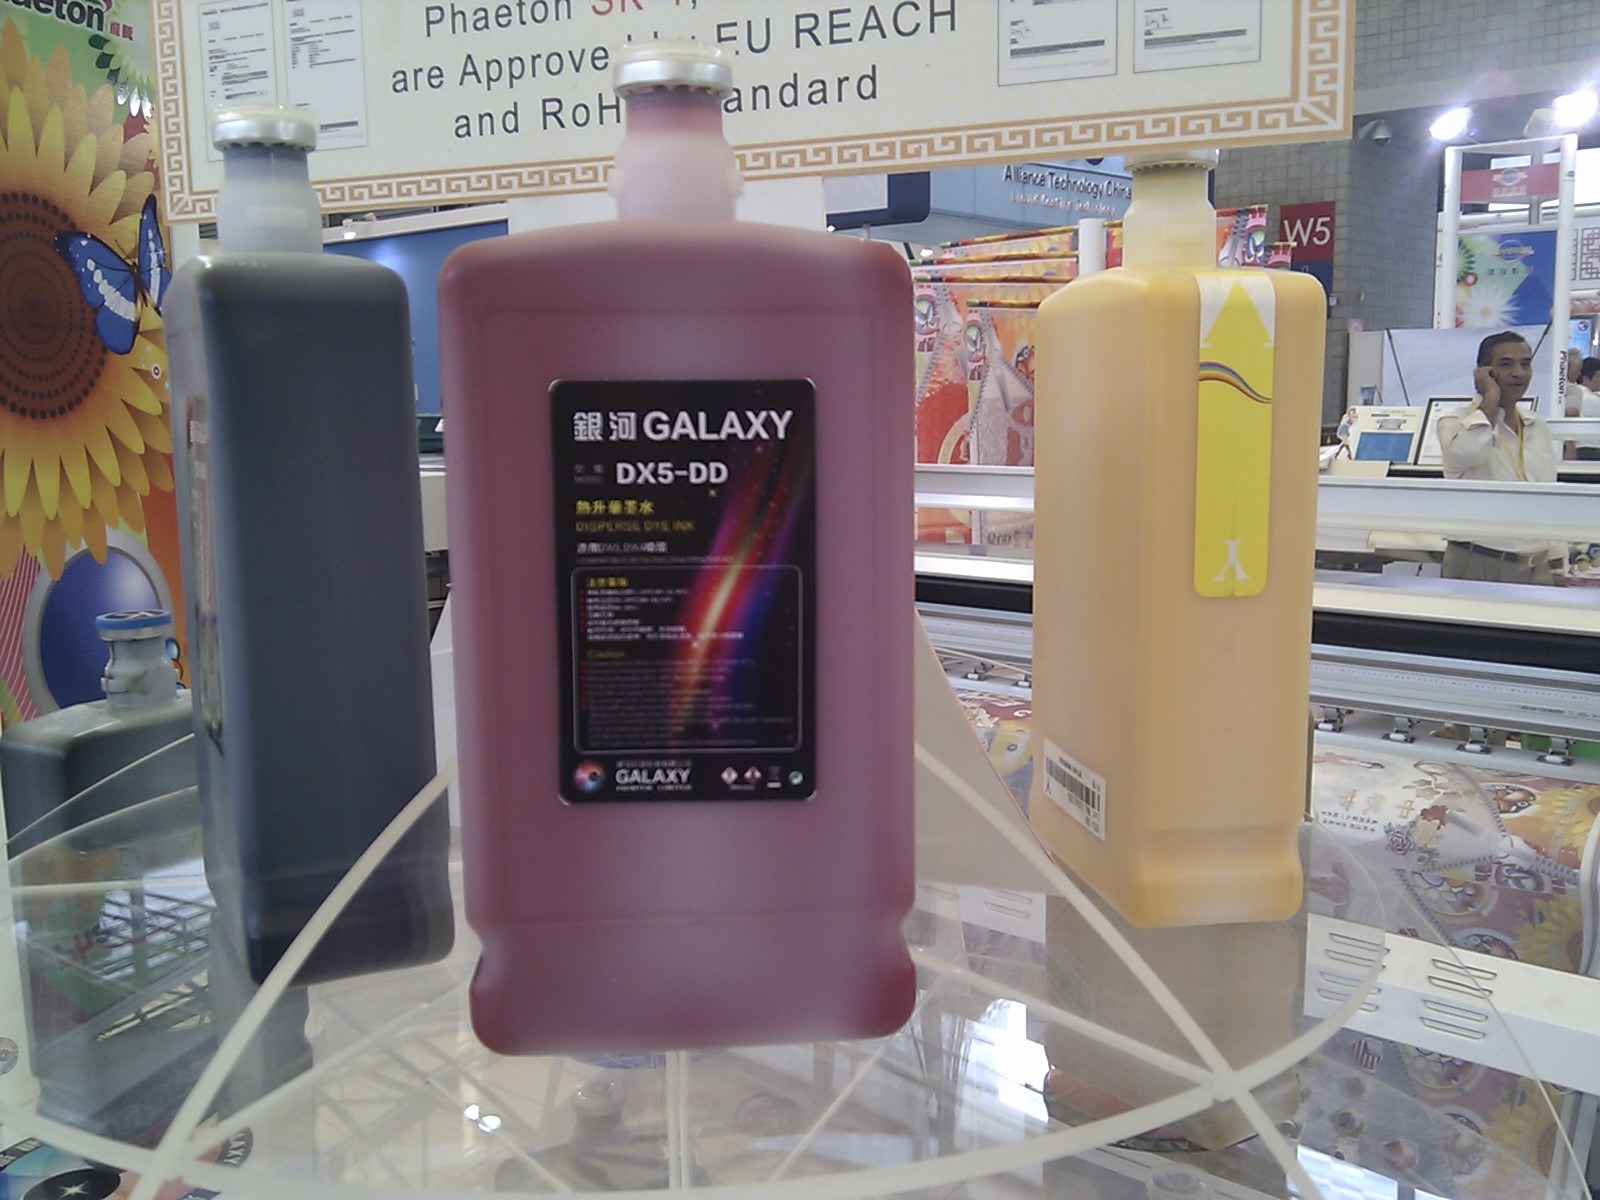 Galaxy Eco Solvent Ink